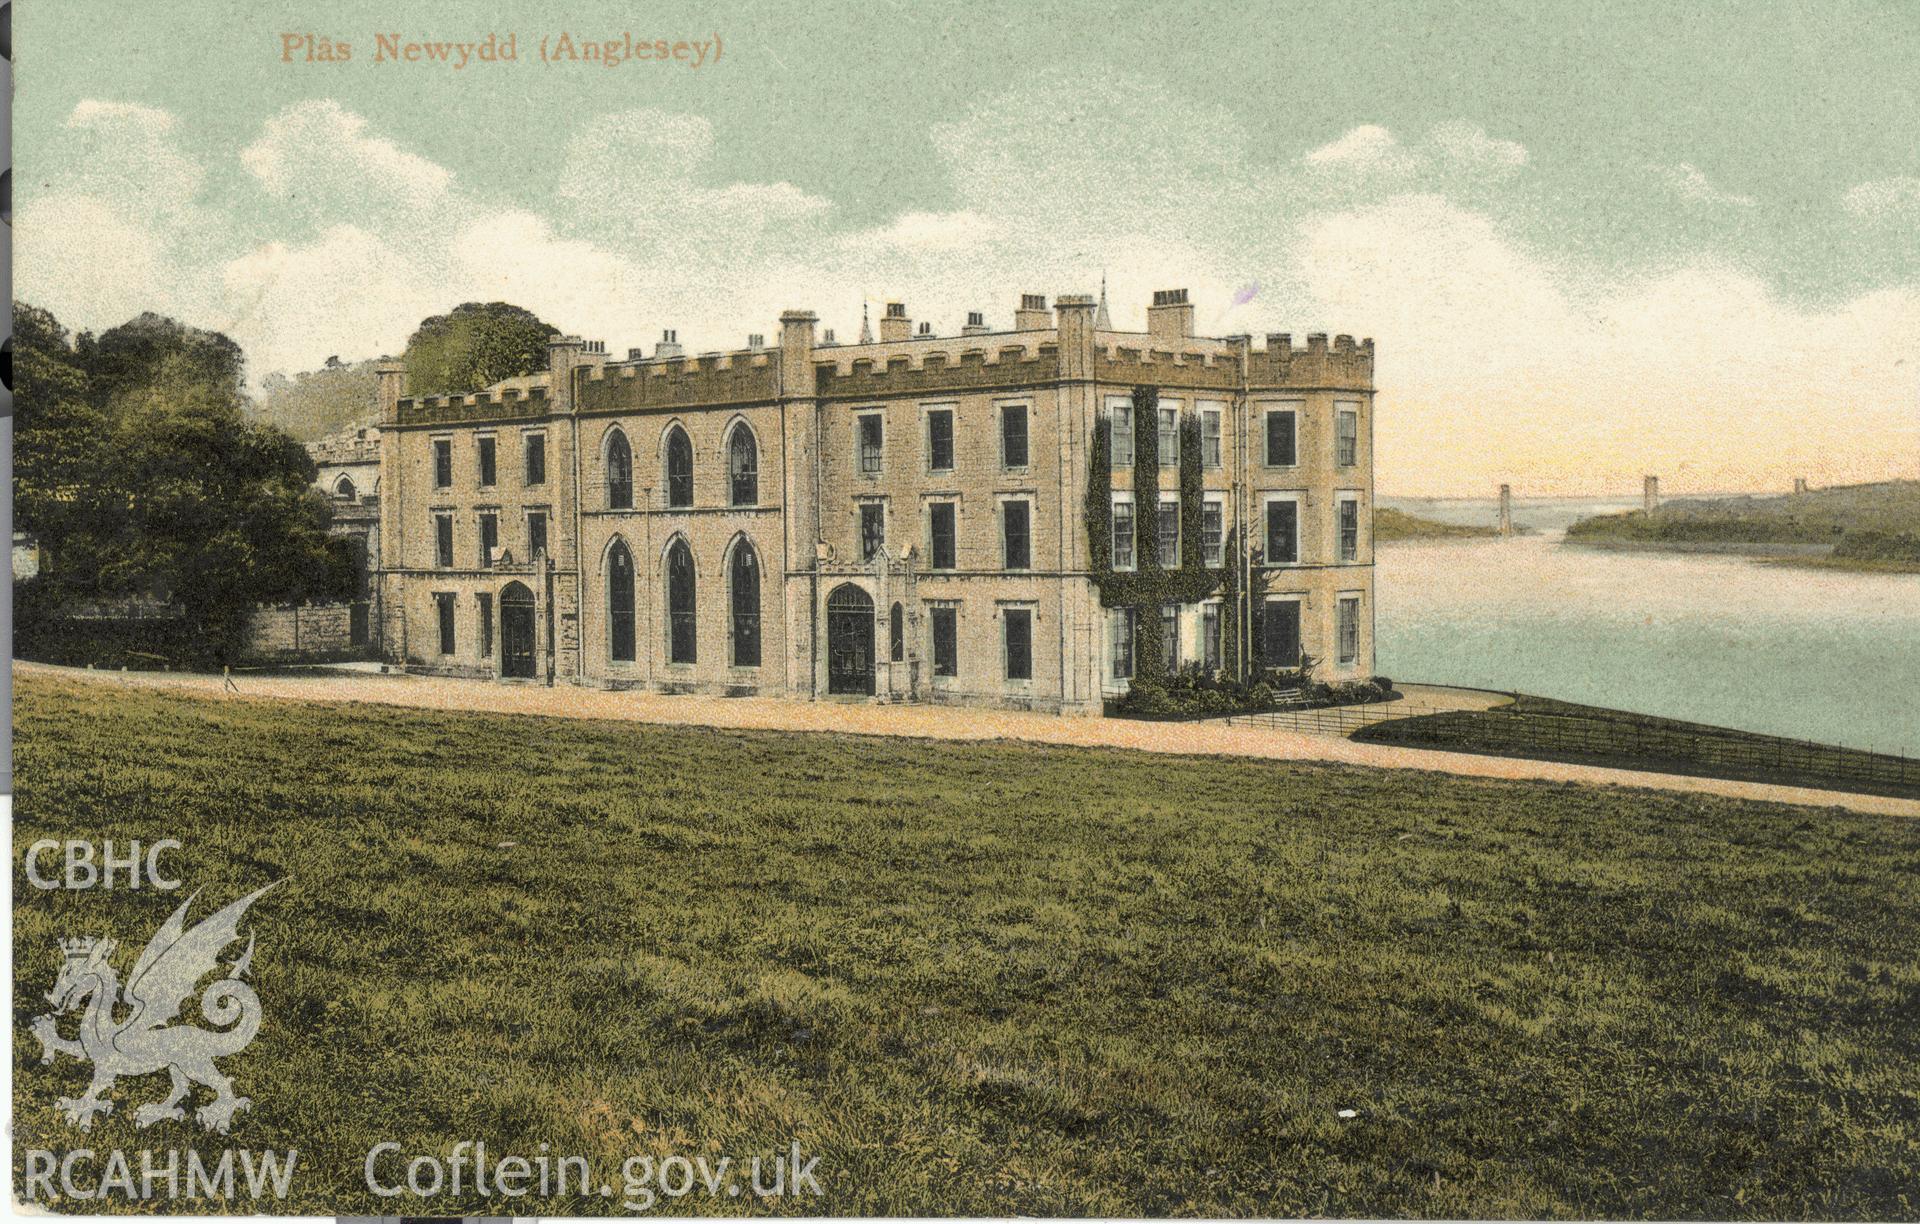 Digitised postcard image of Plas Newydd, Llanddaniel Fab, Pictorial Stationery Co Ltd, London. Produced by Parks and Gardens Data Services, from an original item in the Peter Davis Collection at Parks and Gardens UK. We hold only web-resolution images of this collection, suitable for viewing on screen and for research purposes only. We do not hold the original images, or publication quality scans.